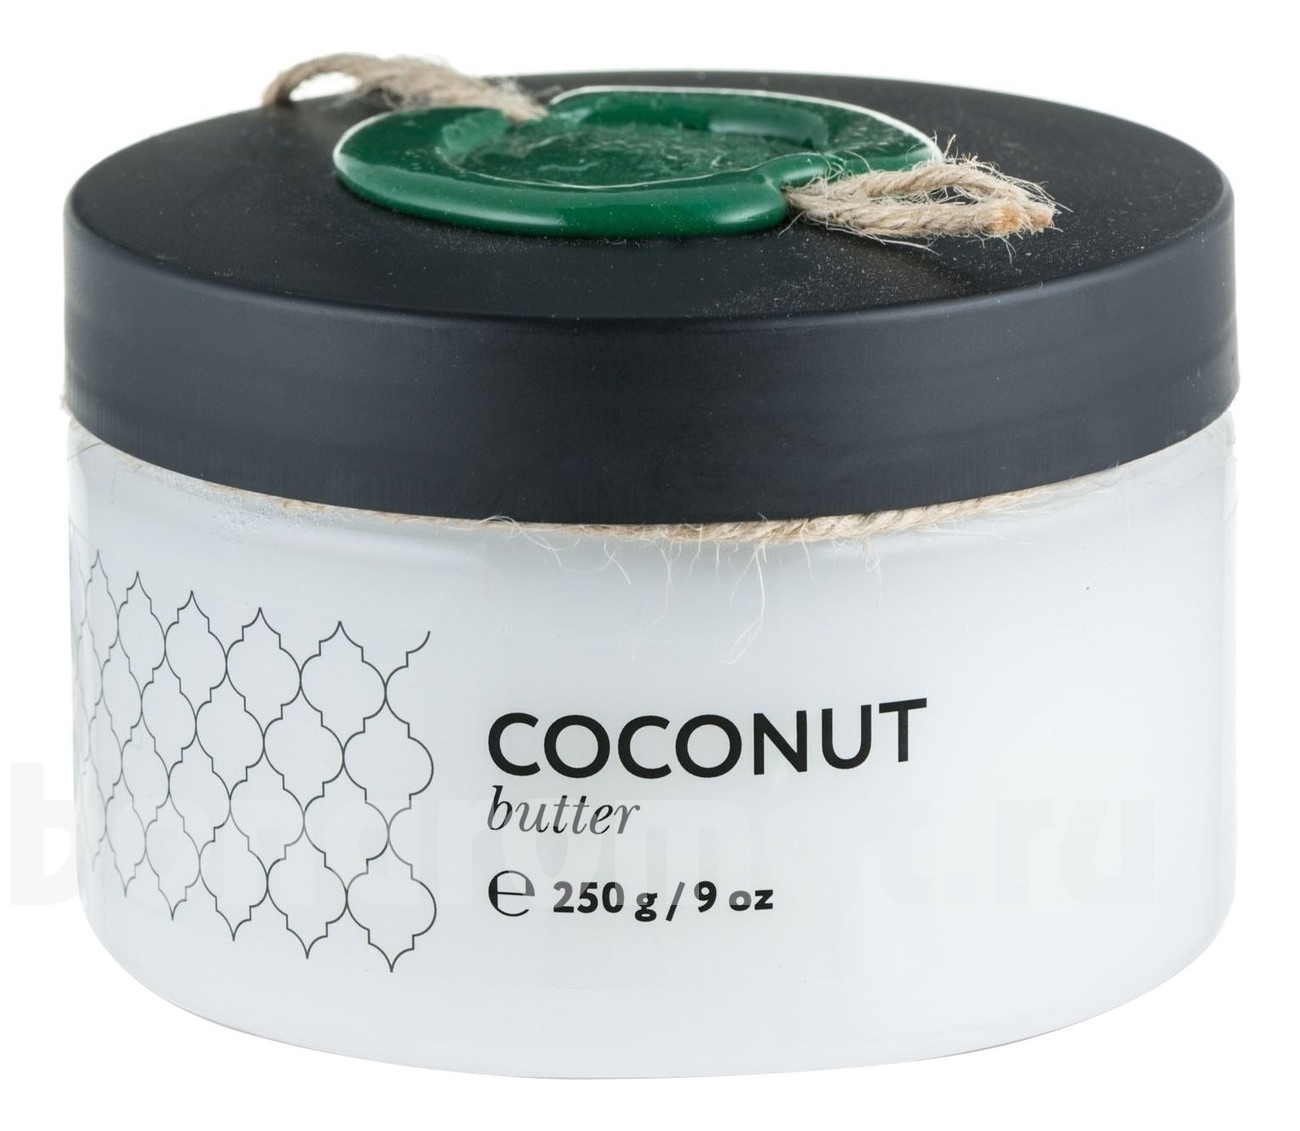    Coconut Butter